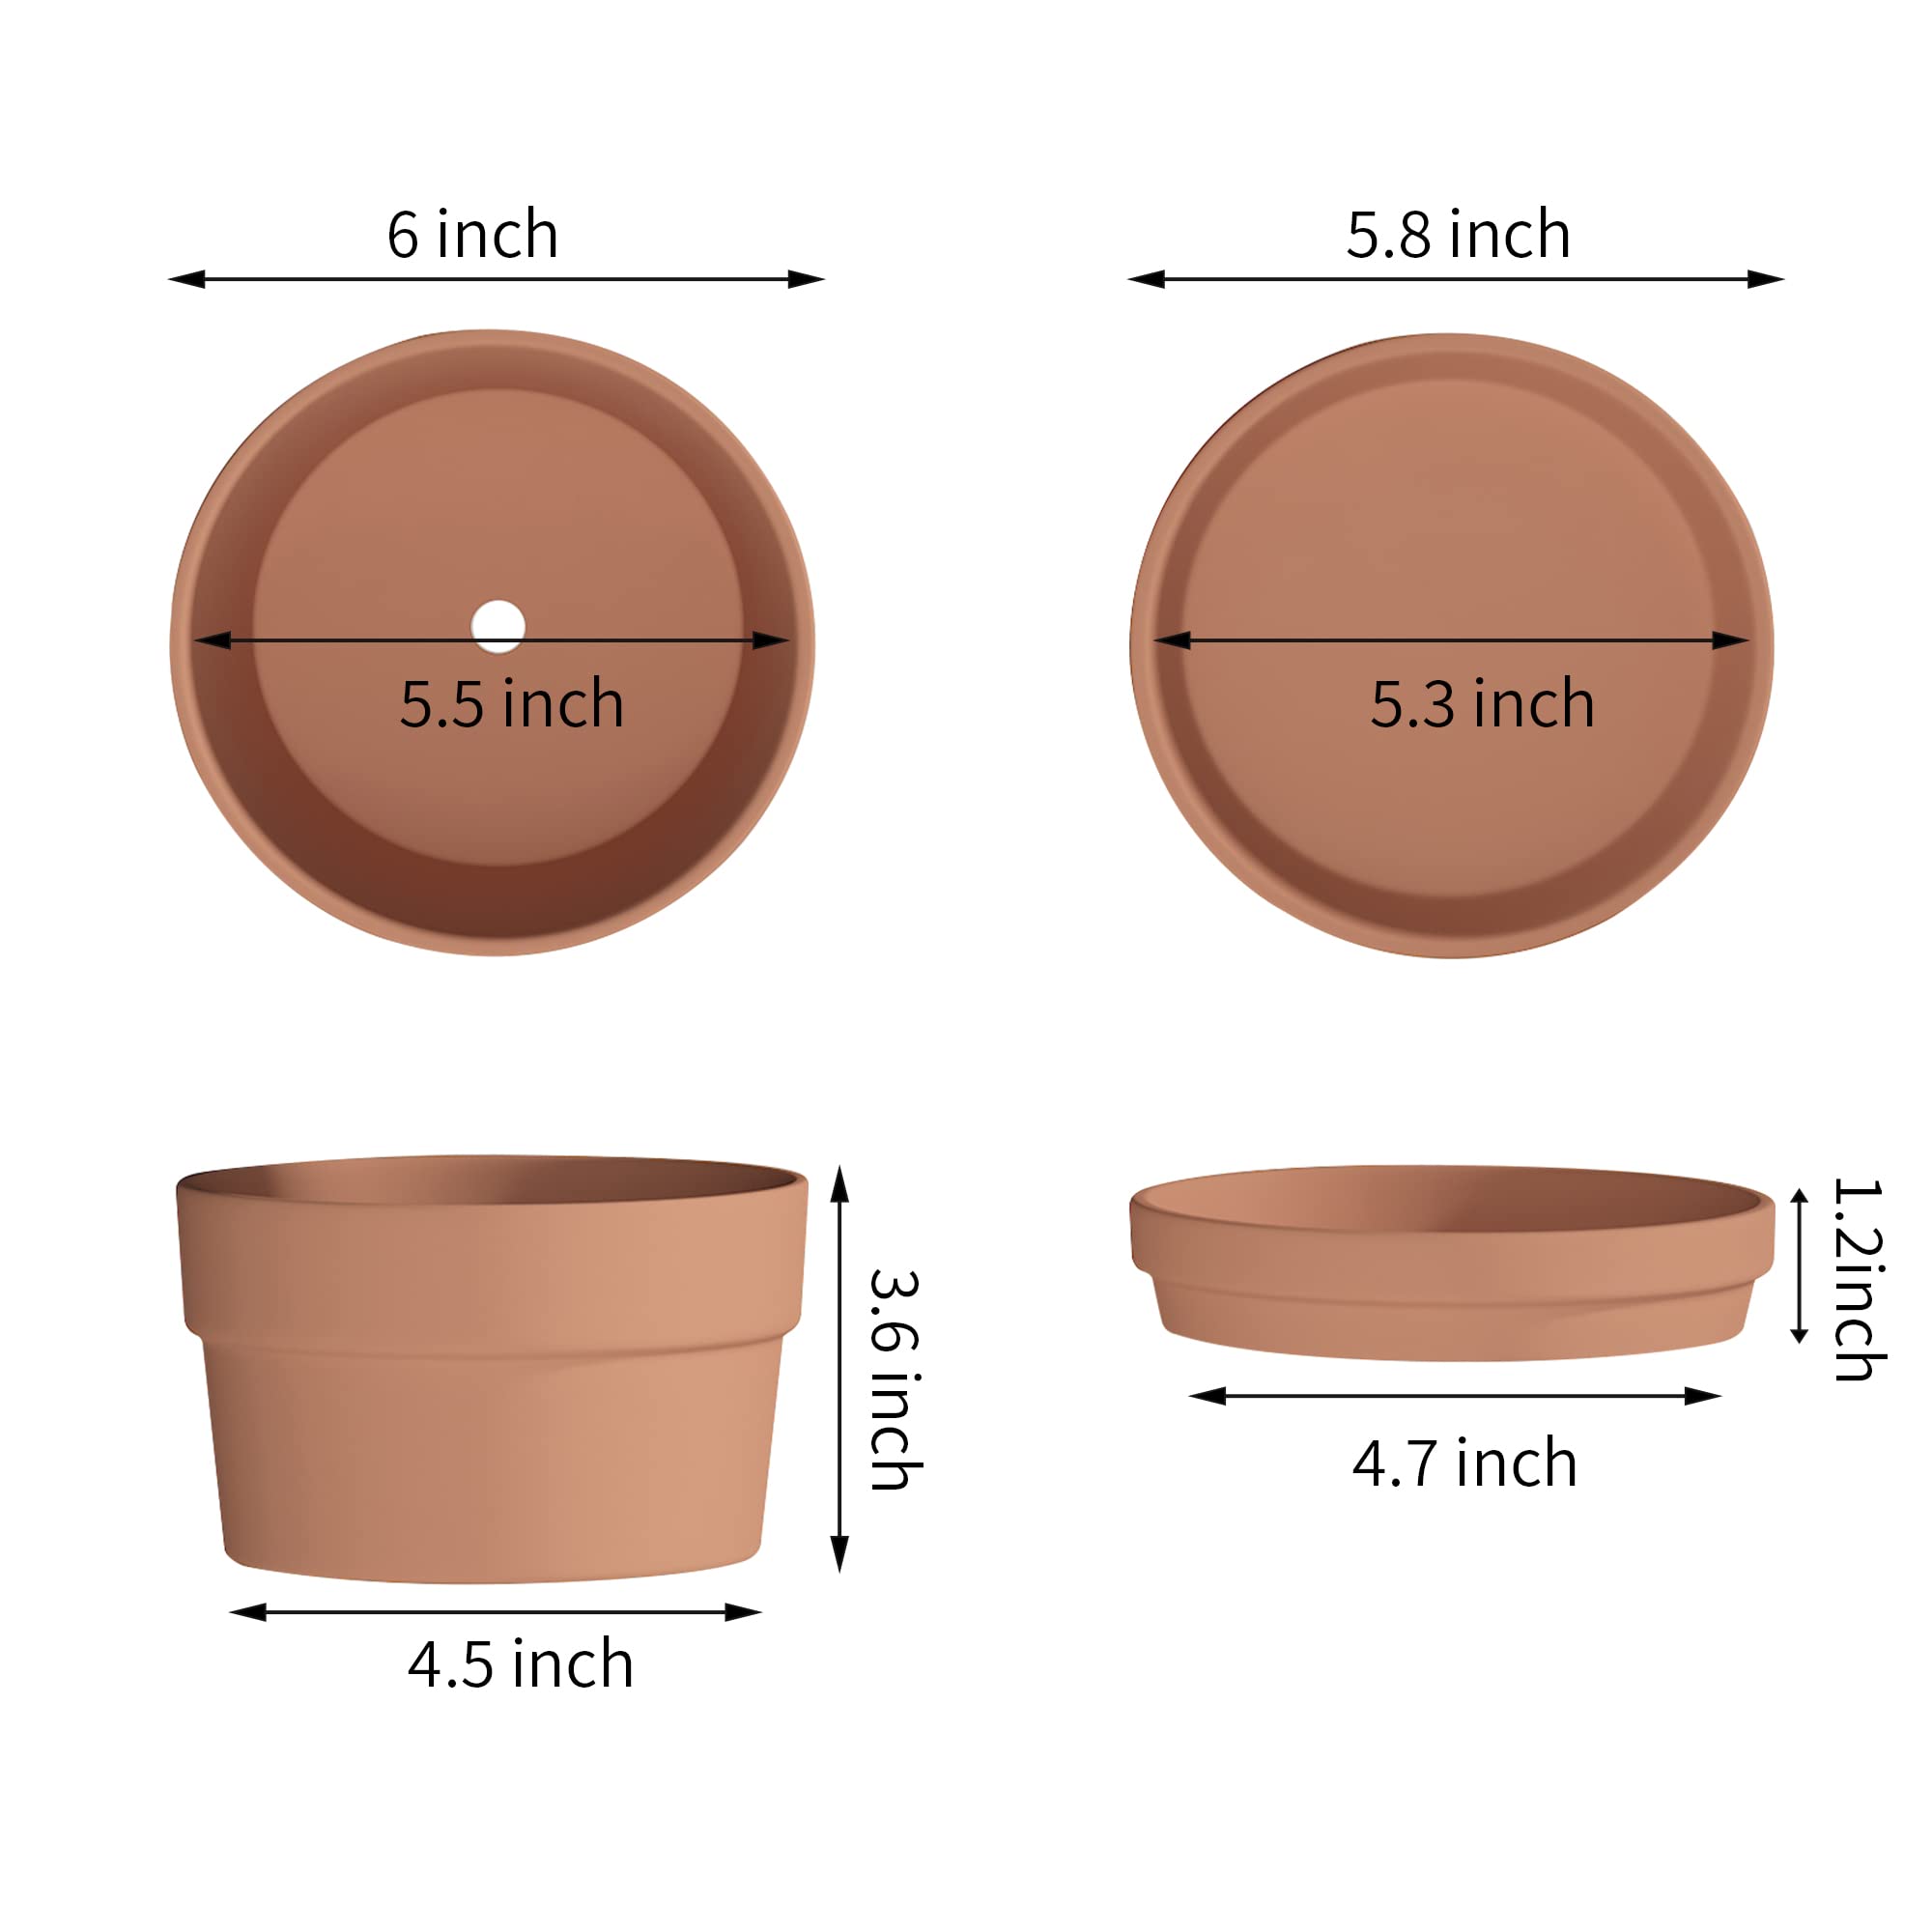 Fcacti 4 Pack 6 Inch Terracotta Shallow Succulent Pot - Large Terra Cotta Clay Pots with Saucer, Round Shallow Terra-Cotta Bonsai Pot with Drainage Hole for Indoor/Outdoor Plants